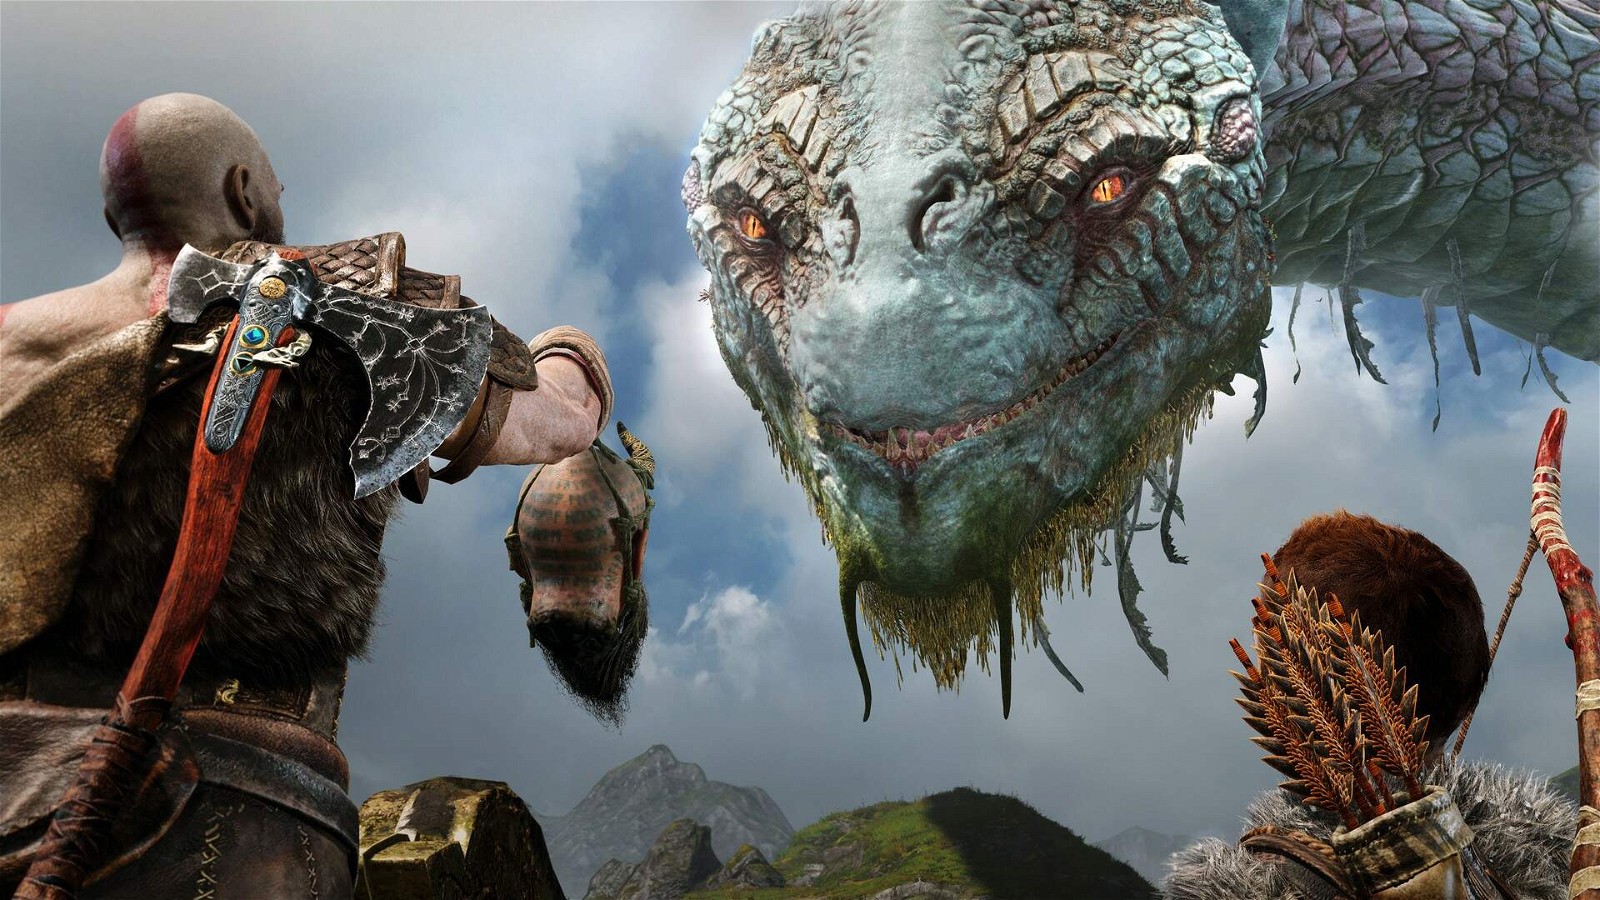 God of War (2018), one of the games Atlas Fallen took inspiration from